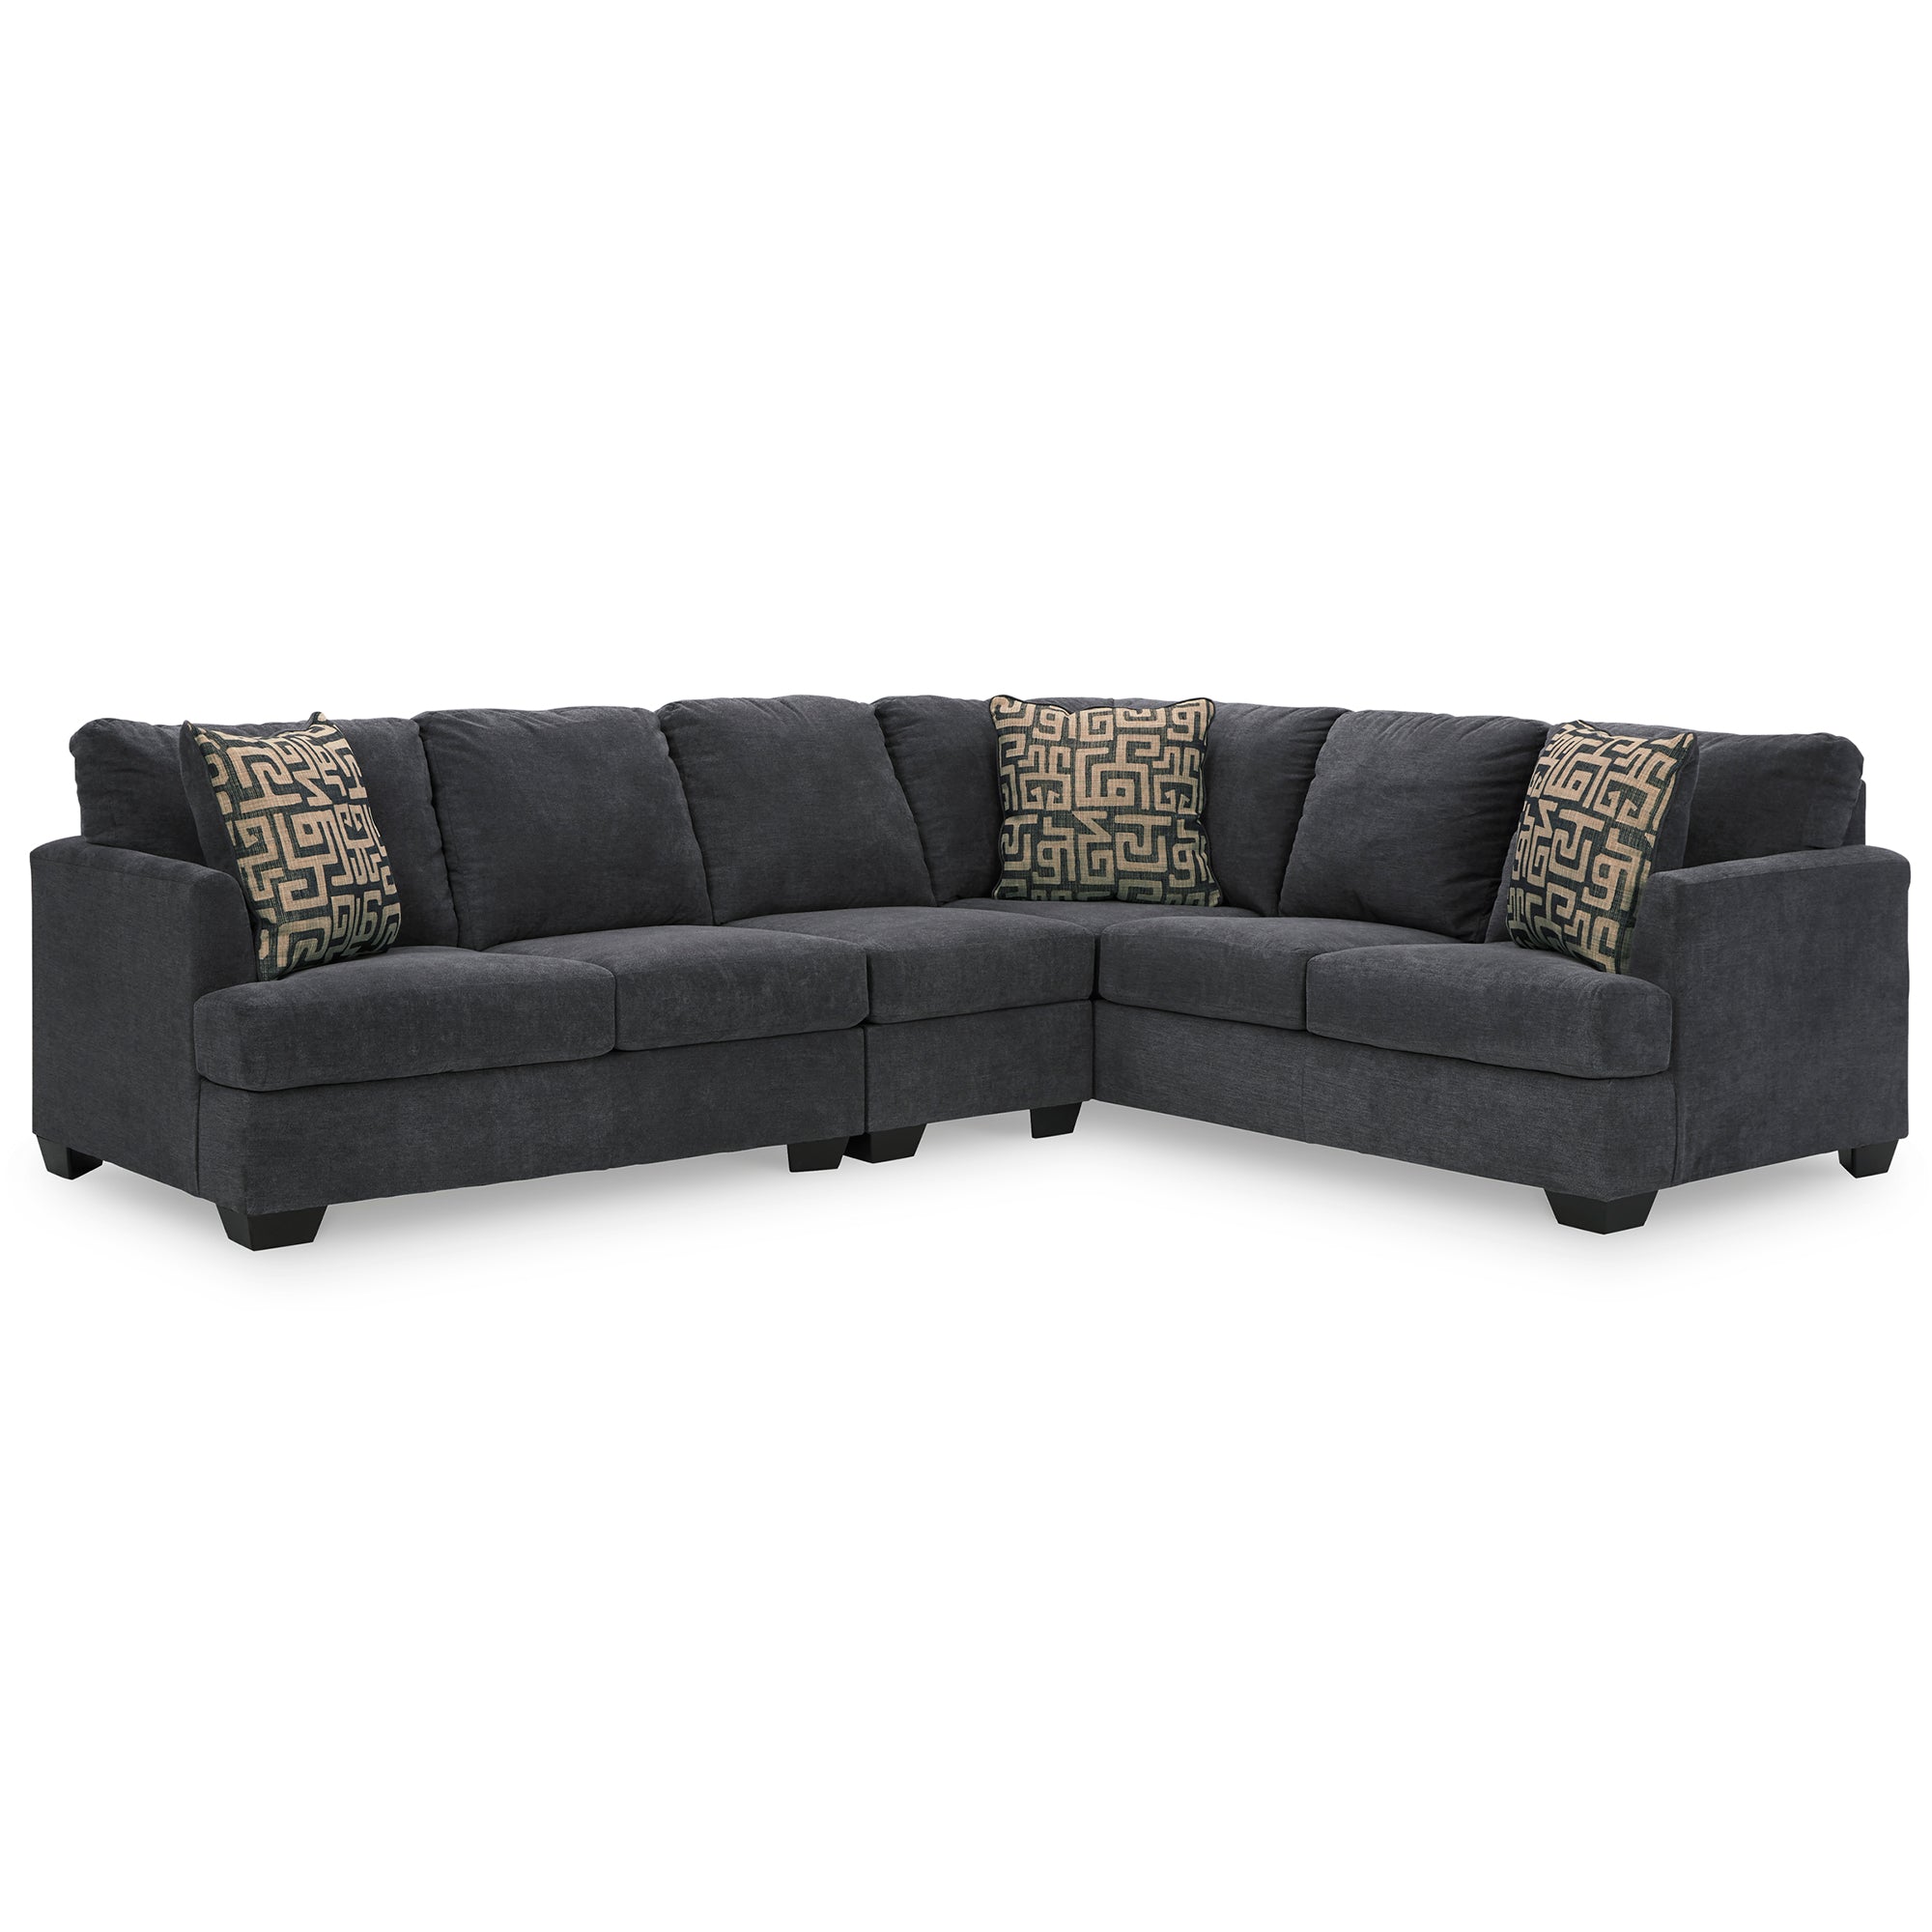 Ambrielle 3-Piece Sectional in Gunmetal Color